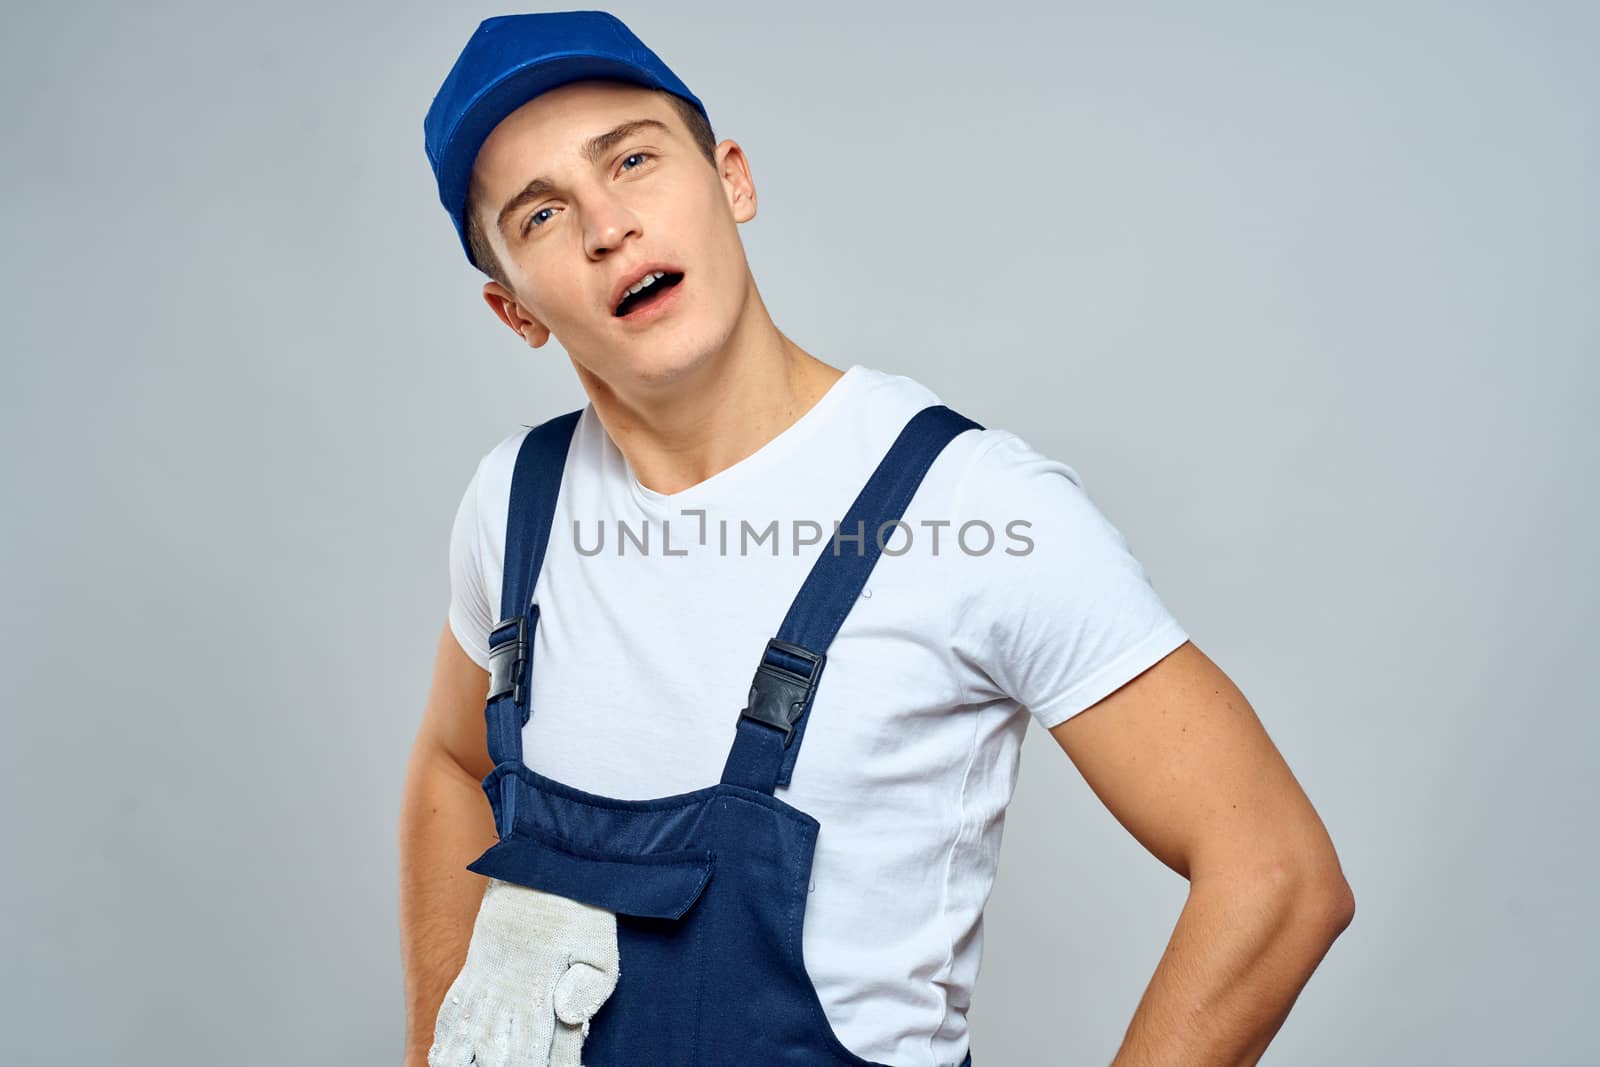 working man in uniform service lifestyle delivery service light background by SHOTPRIME